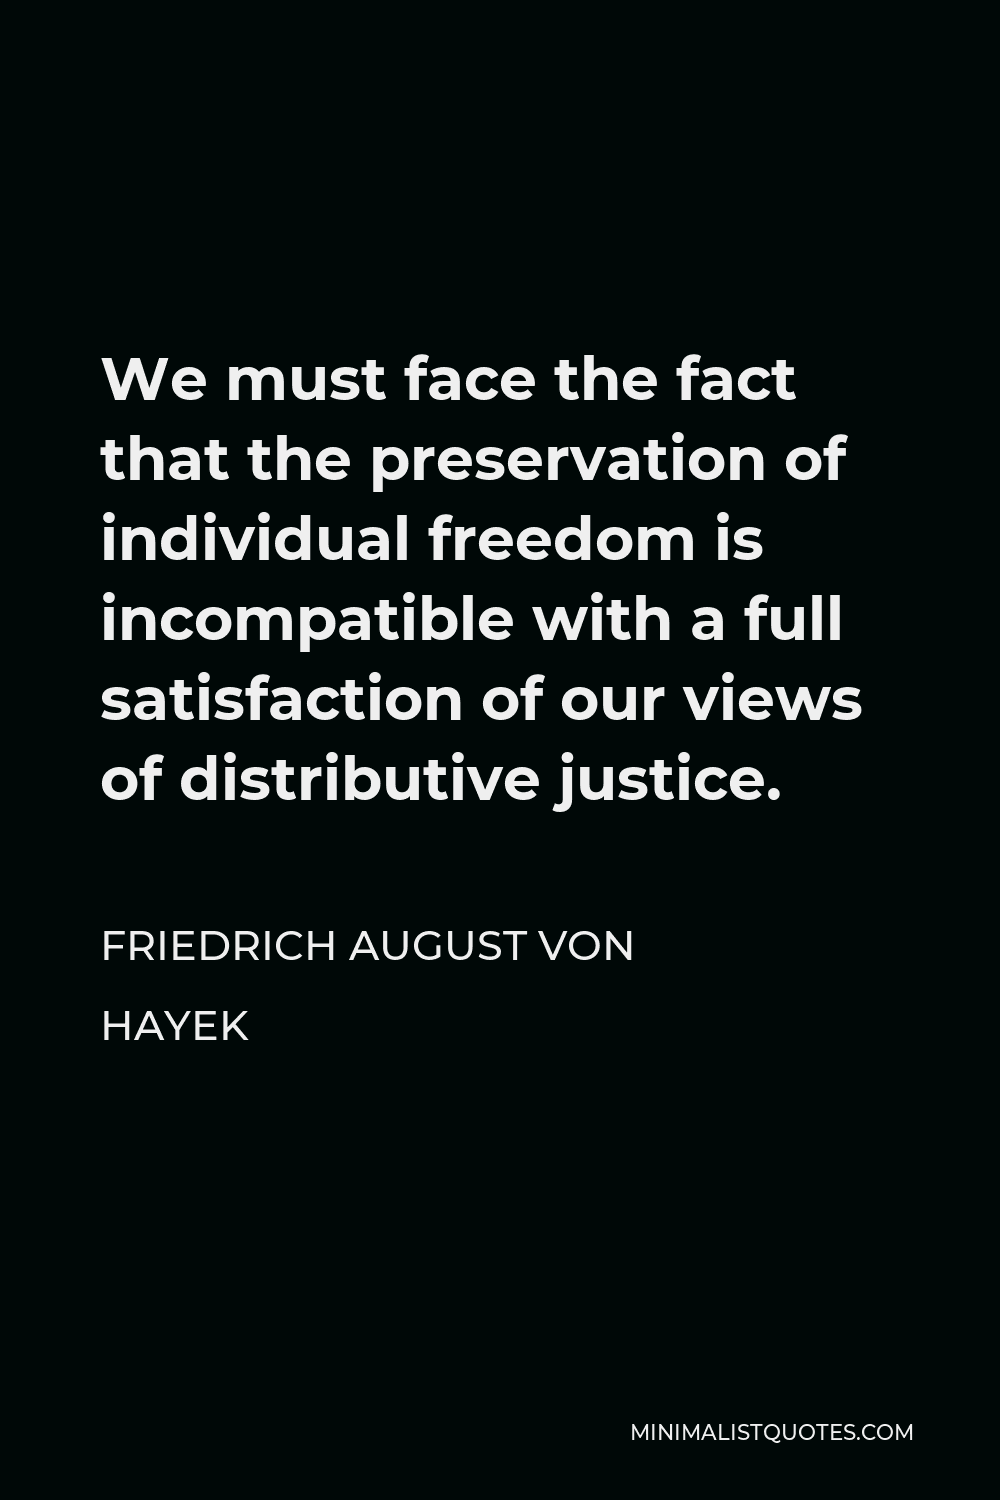 Friedrich August von Hayek Quote - We must face the fact that the preservation of individual freedom is incompatible with a full satisfaction of our views of distributive justice.